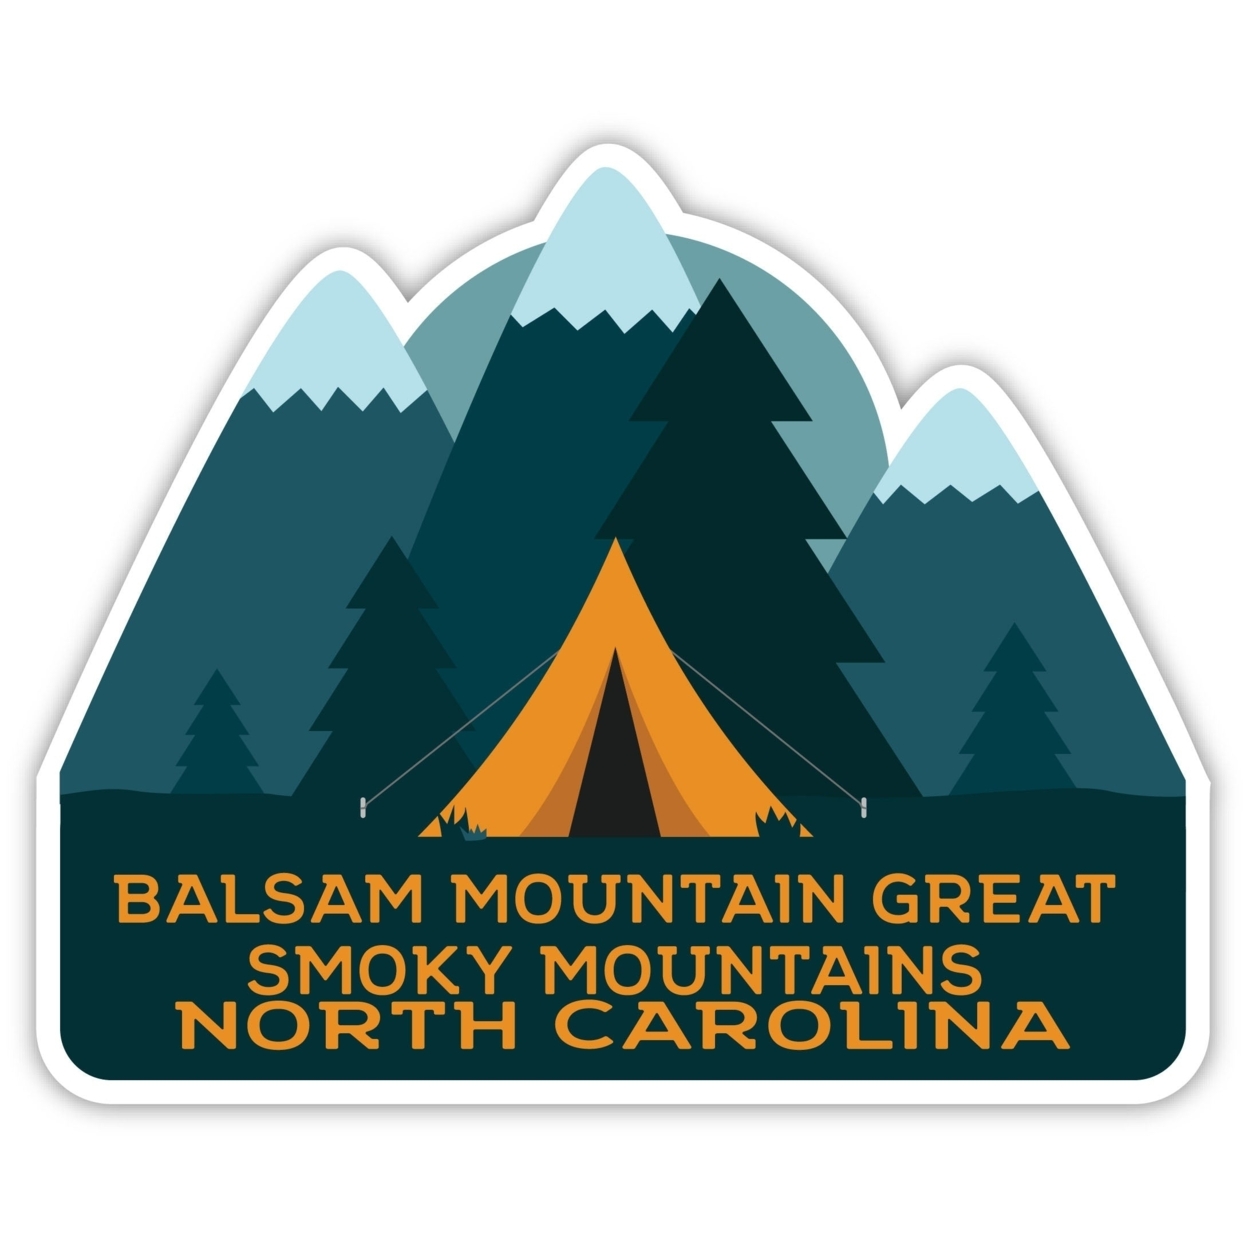 Balsam Mountain Great Smoky Mountains North Carolina Souvenir Decorative Stickers (Choose Theme And Size) - 4-Pack, 2-Inch, Tent